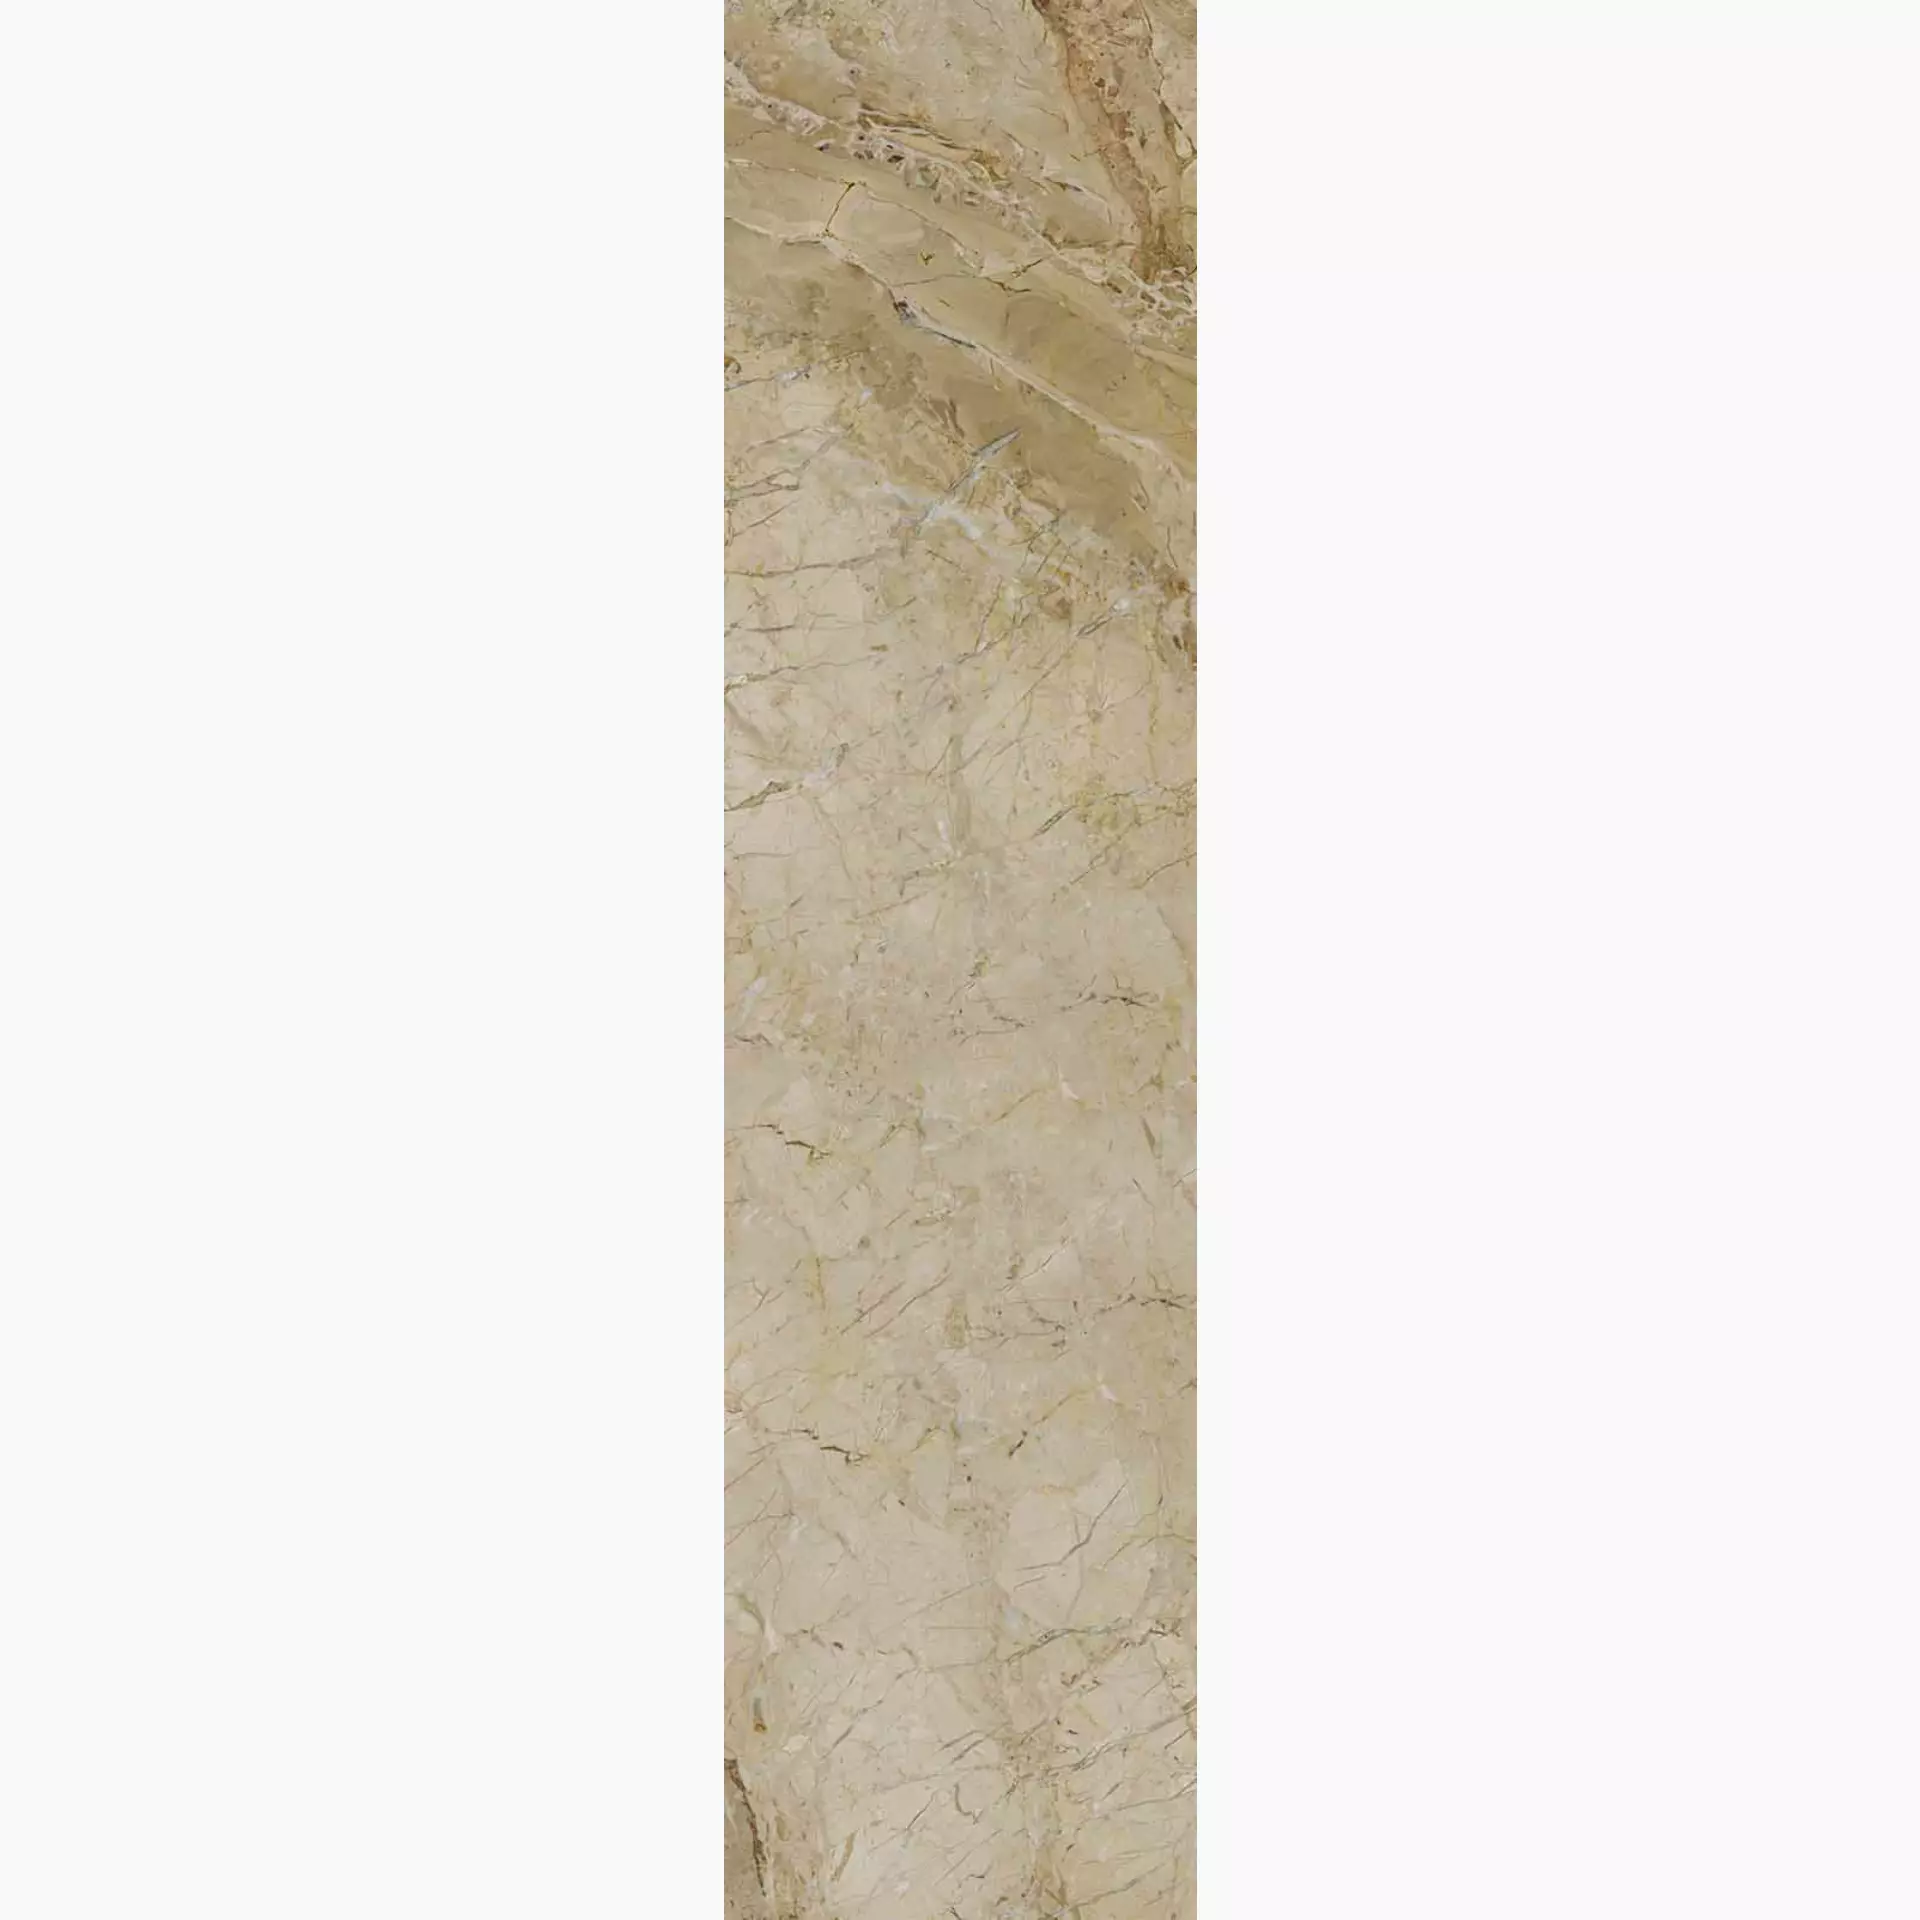 Keope 9Cento Aurora Beige Lappato 46394532 30x120cm rectified 9mm